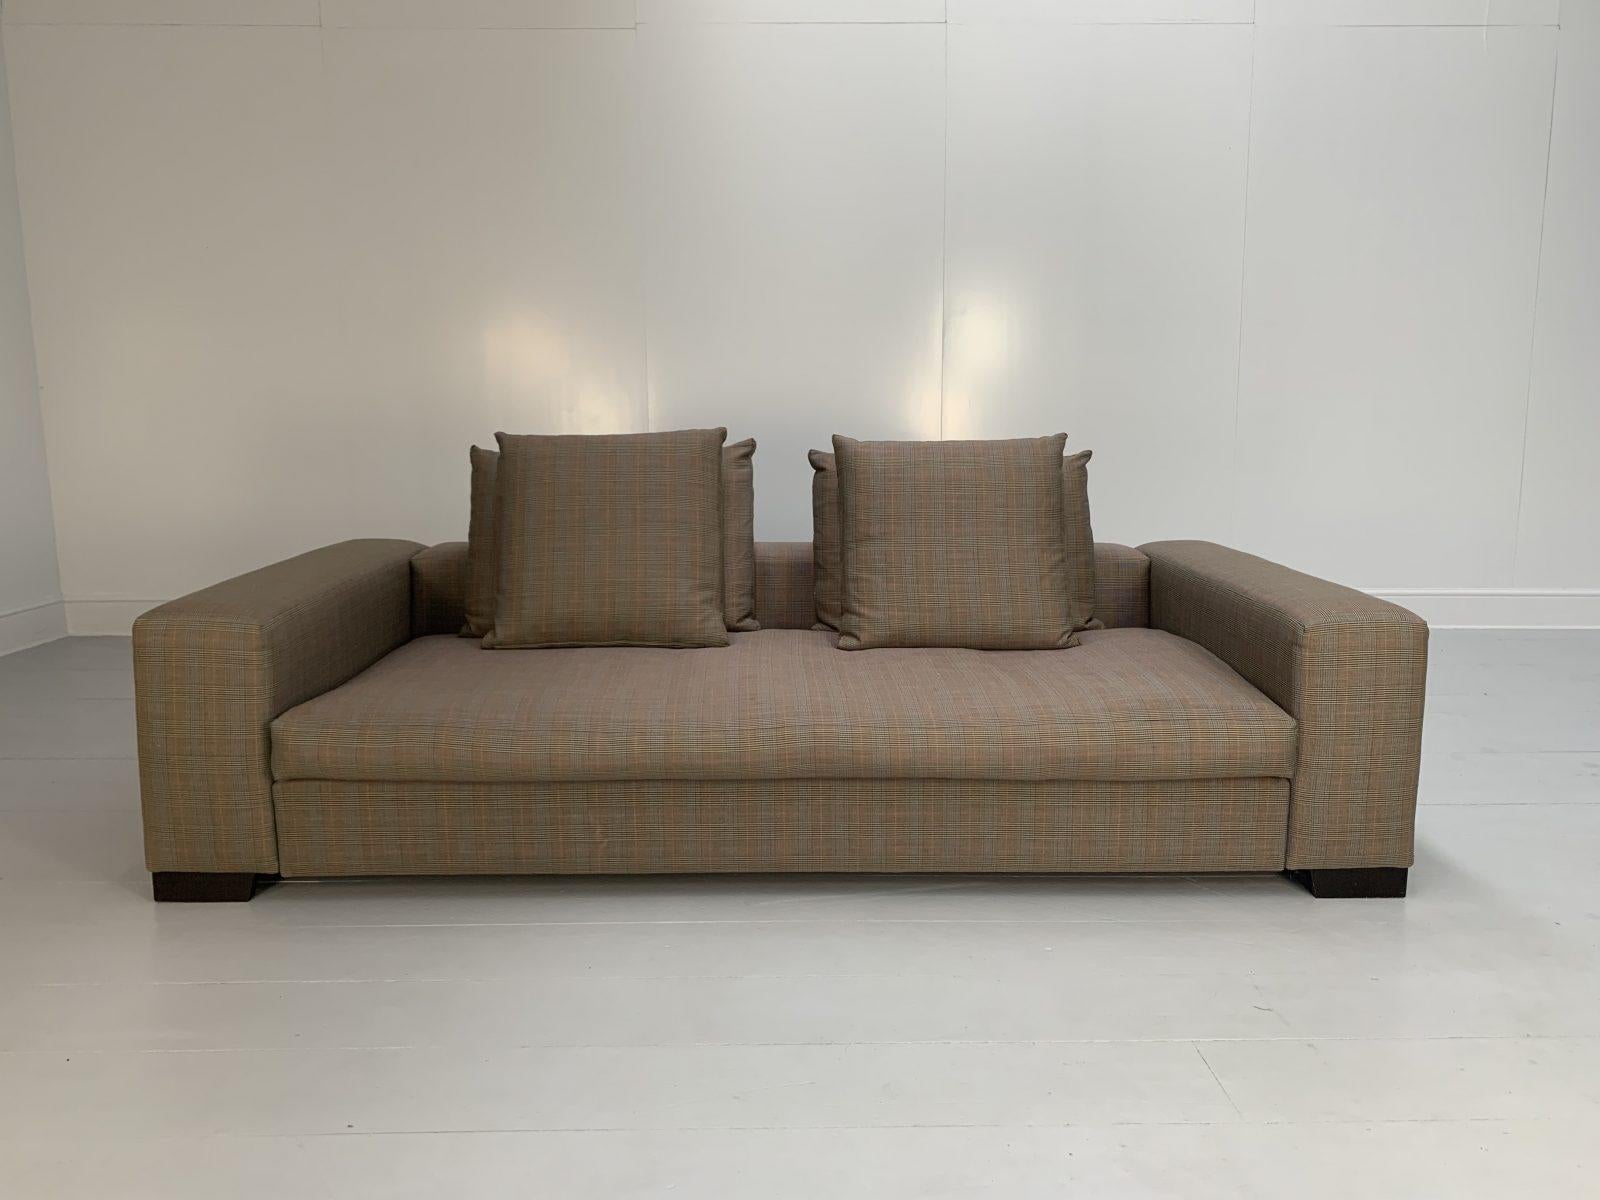 Hello Friends, and welcome to another unmissable offering from Lord Browns Furniture, the UK’s premier resource for fine Sofas and Chairs.

On offer on this occasion is a spectacular George Smith “Square” Large 4-Seat Sofa, dressed in a peerless,